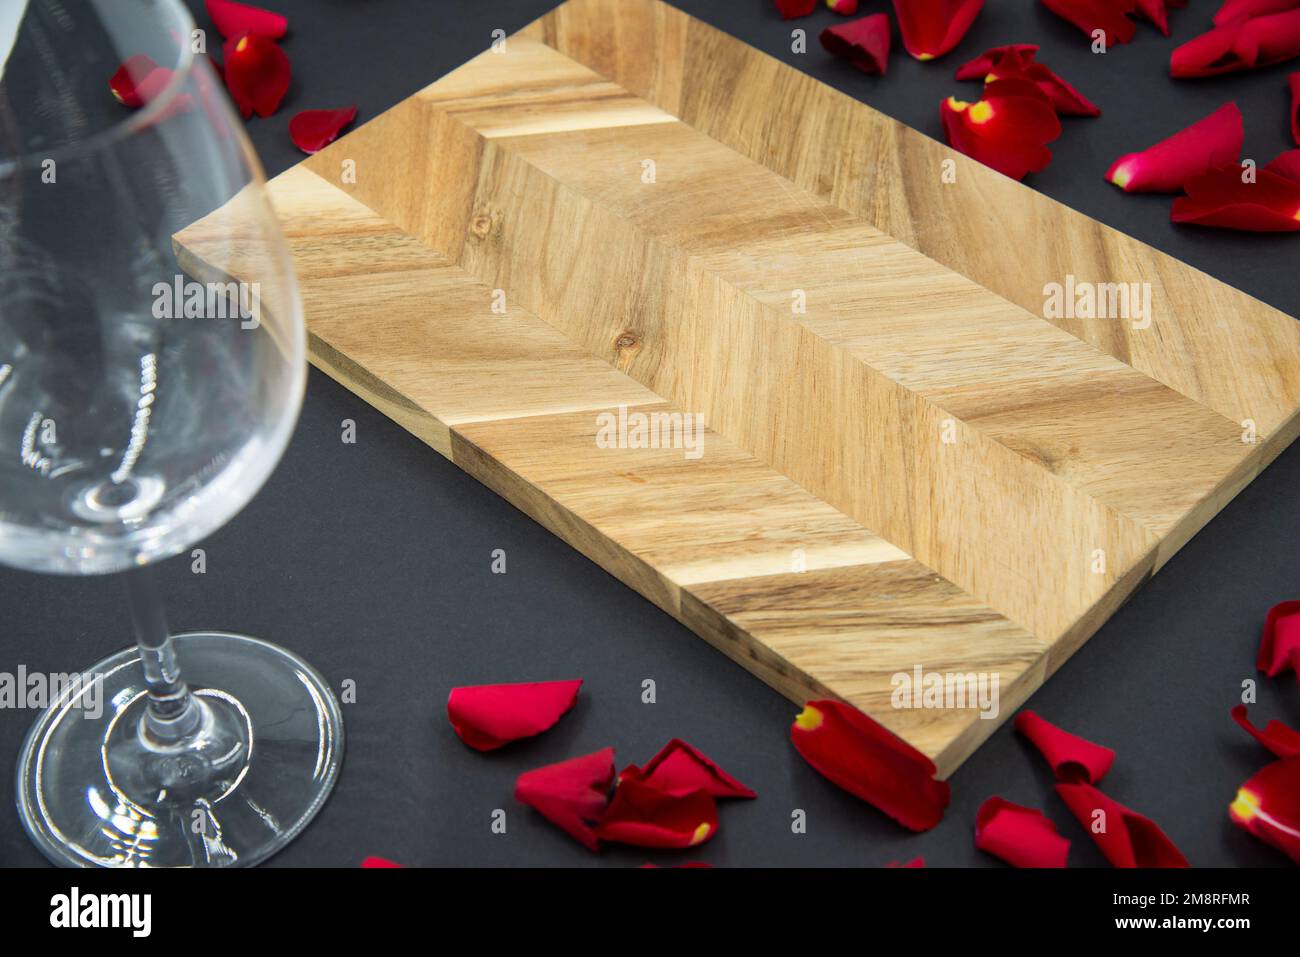 Wooden cutting board for cooking on a dark black background with a glass of wine and red rose petals. Stock Photo